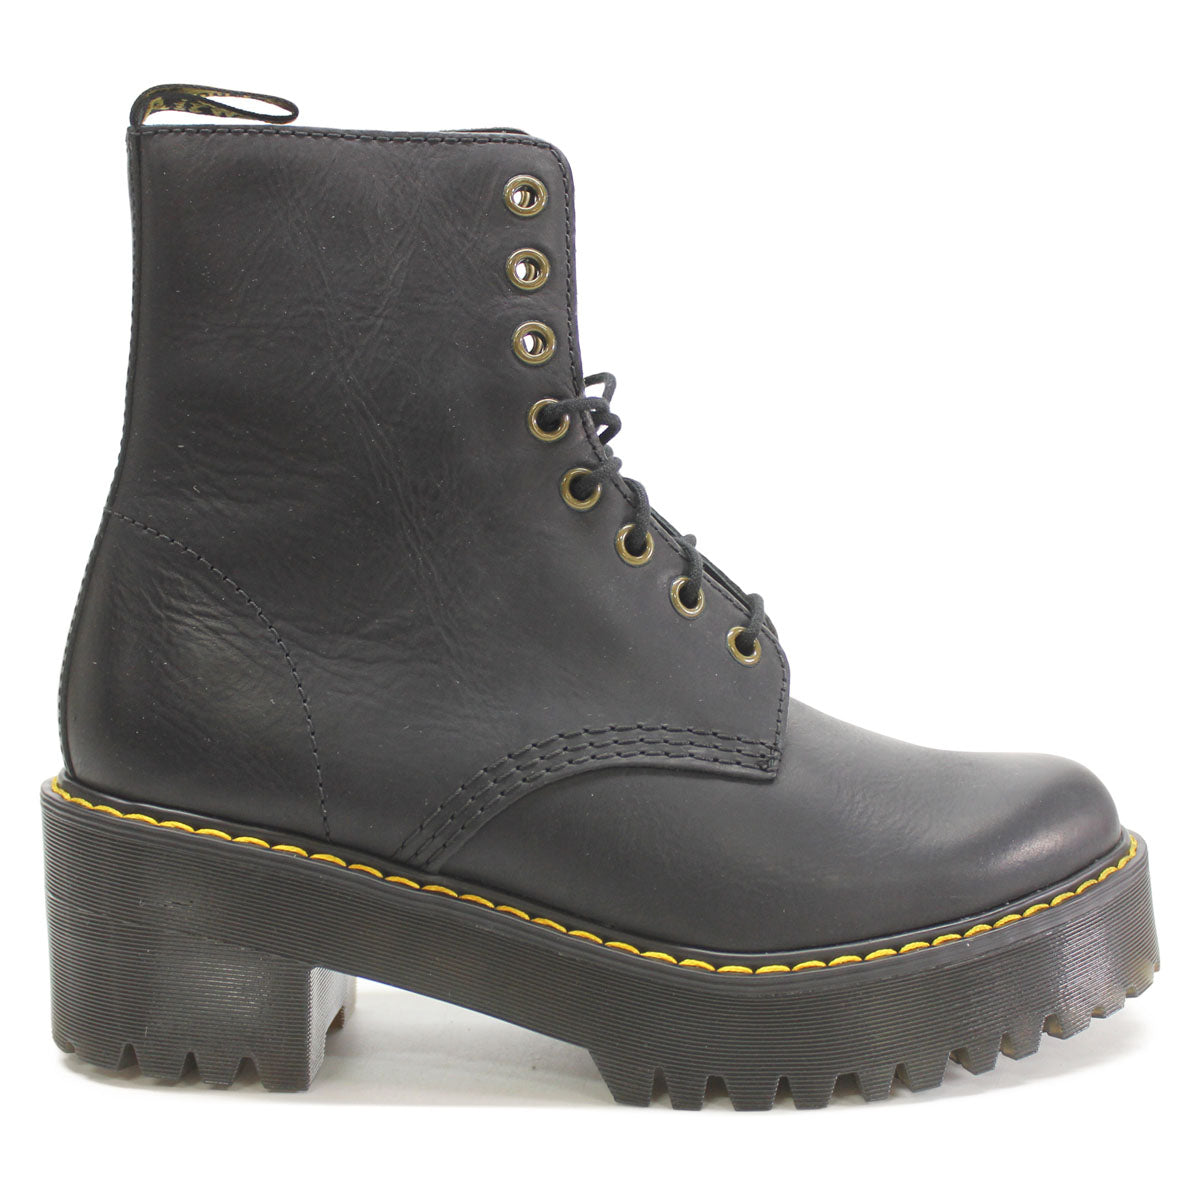 Dr. Martens Womens Shriver Hi Wyoming Leather Boots - UK 6